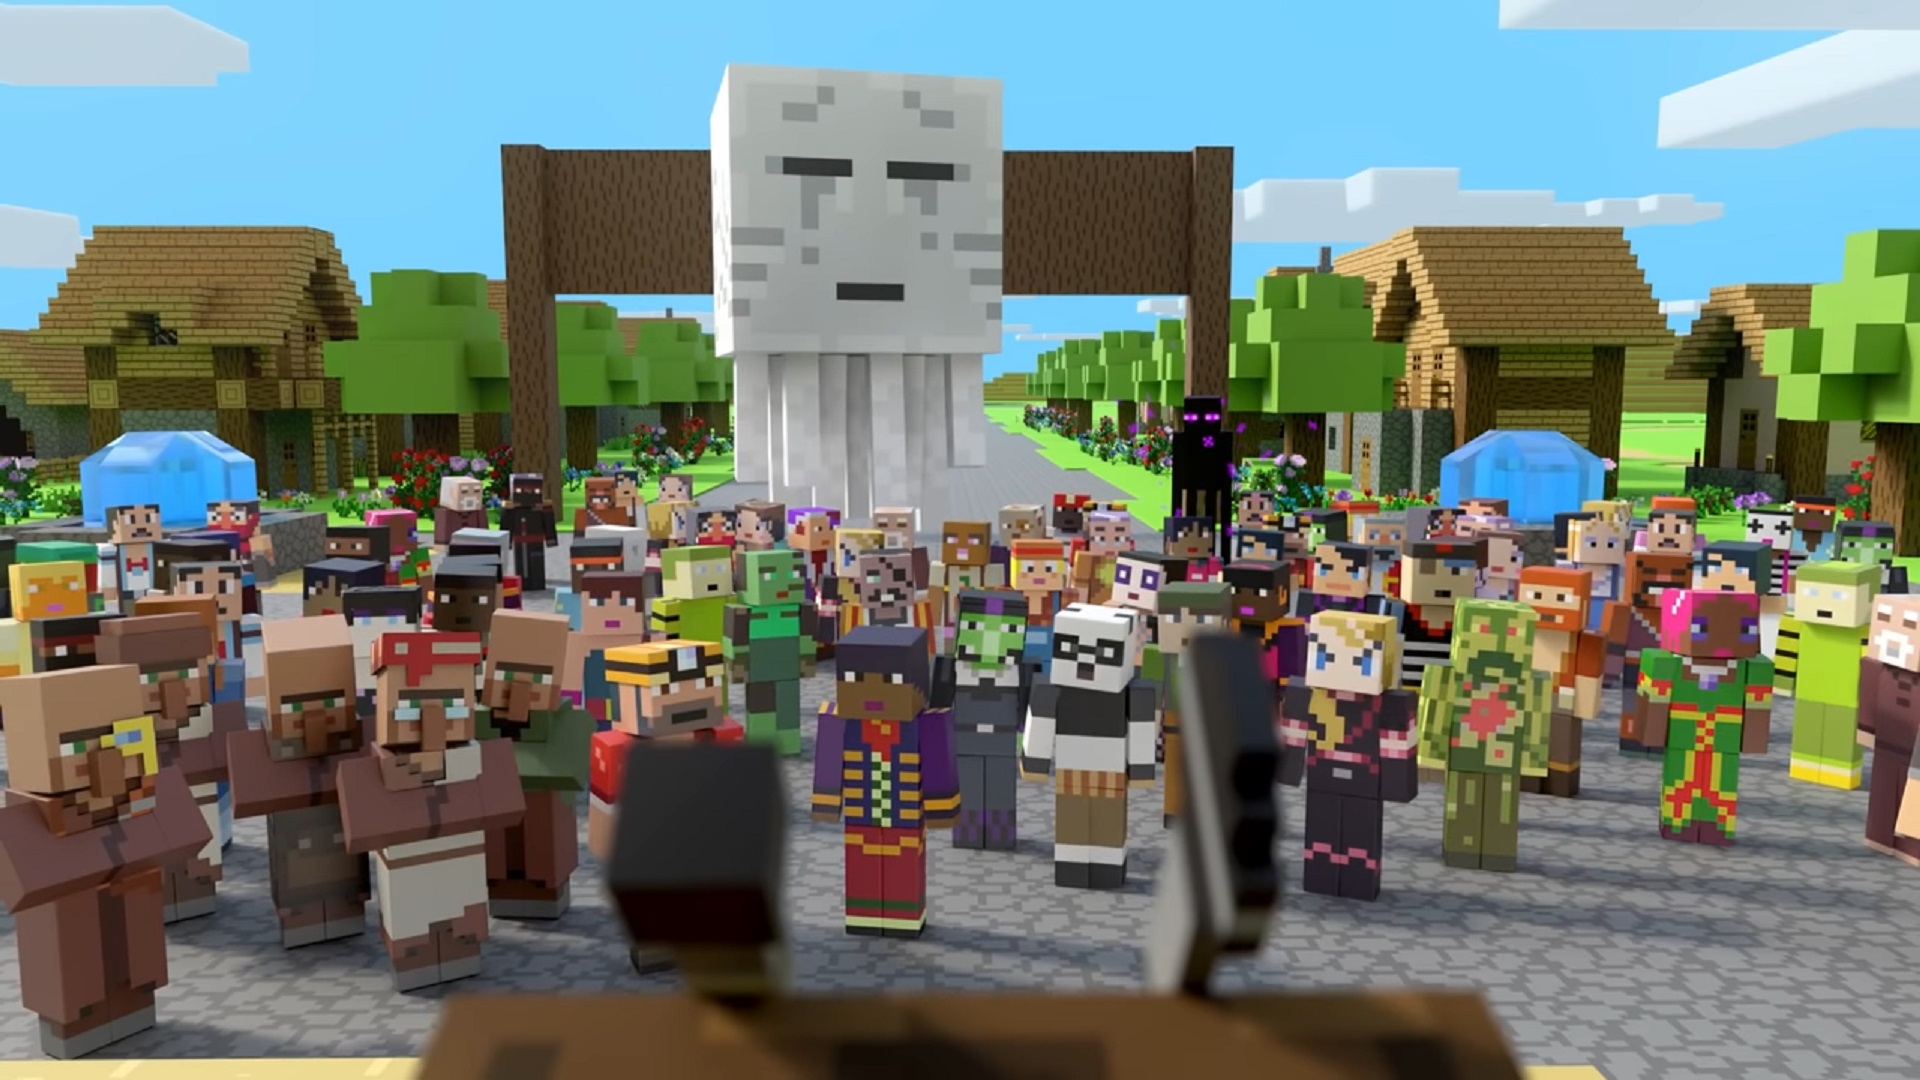 Notorious Minecraft Herobrine world seed has finally been unveiled